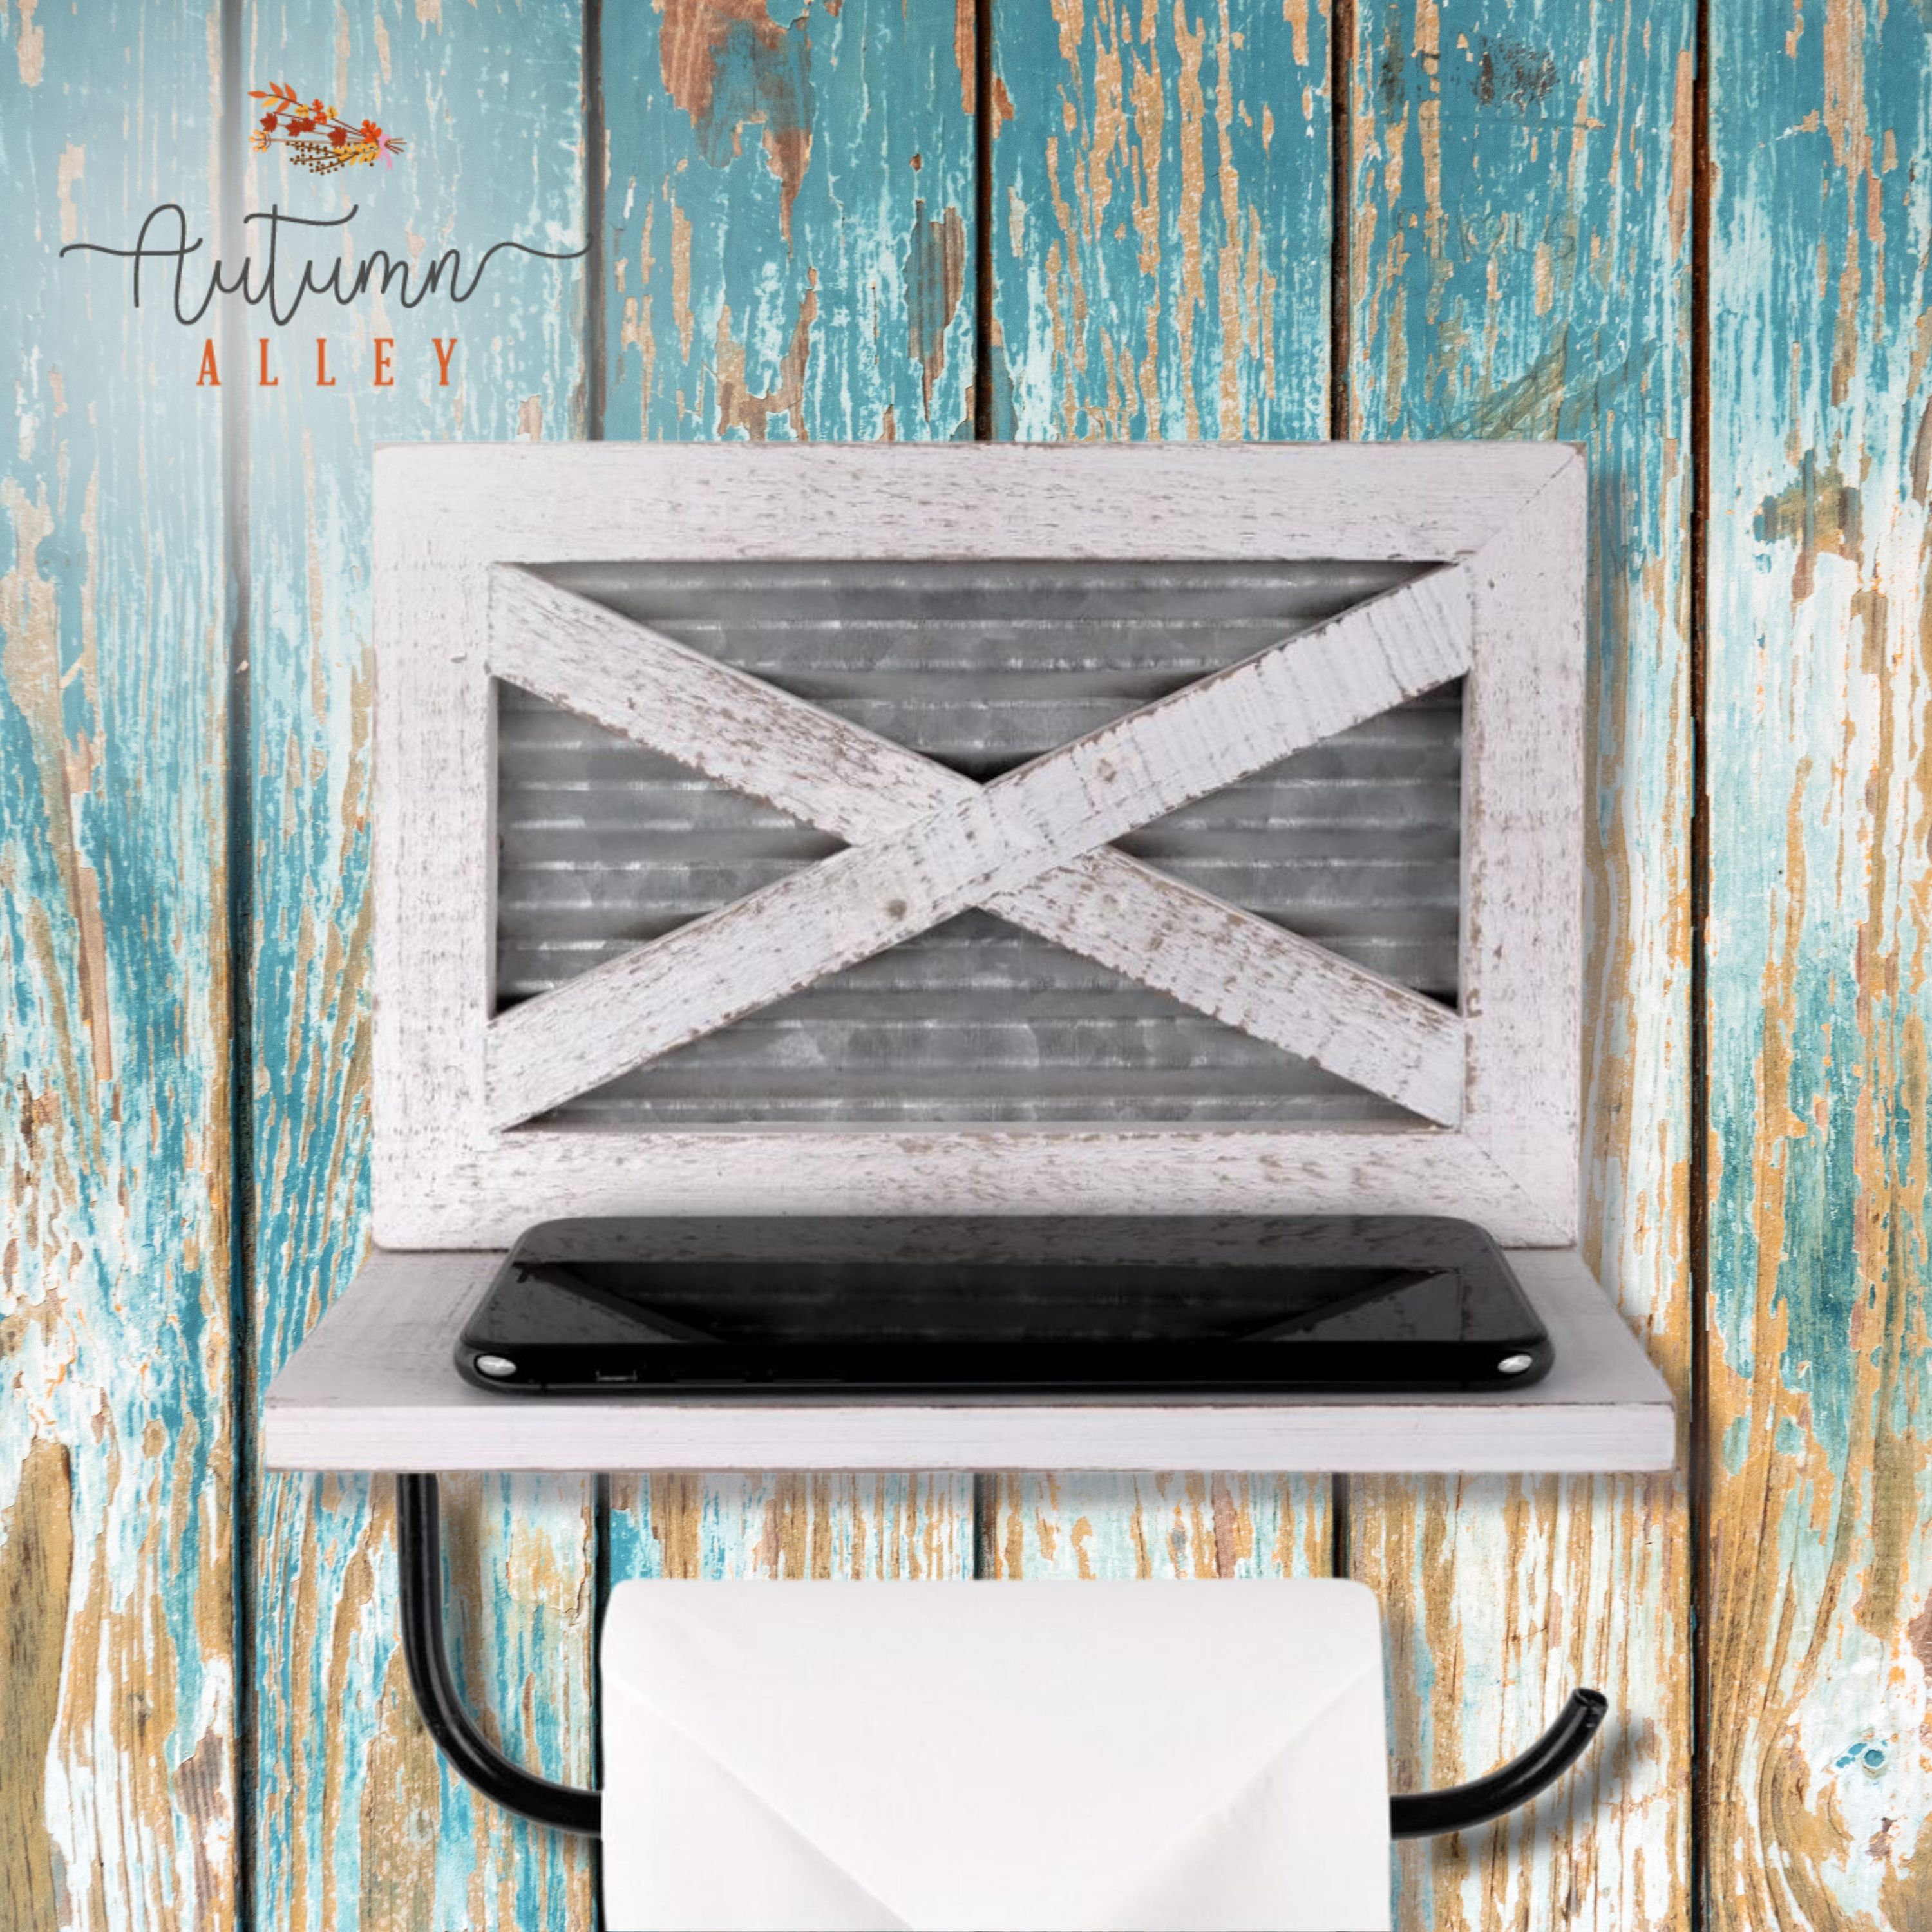 autumn alley farmhouse toilet paper holder with shelf - rustic